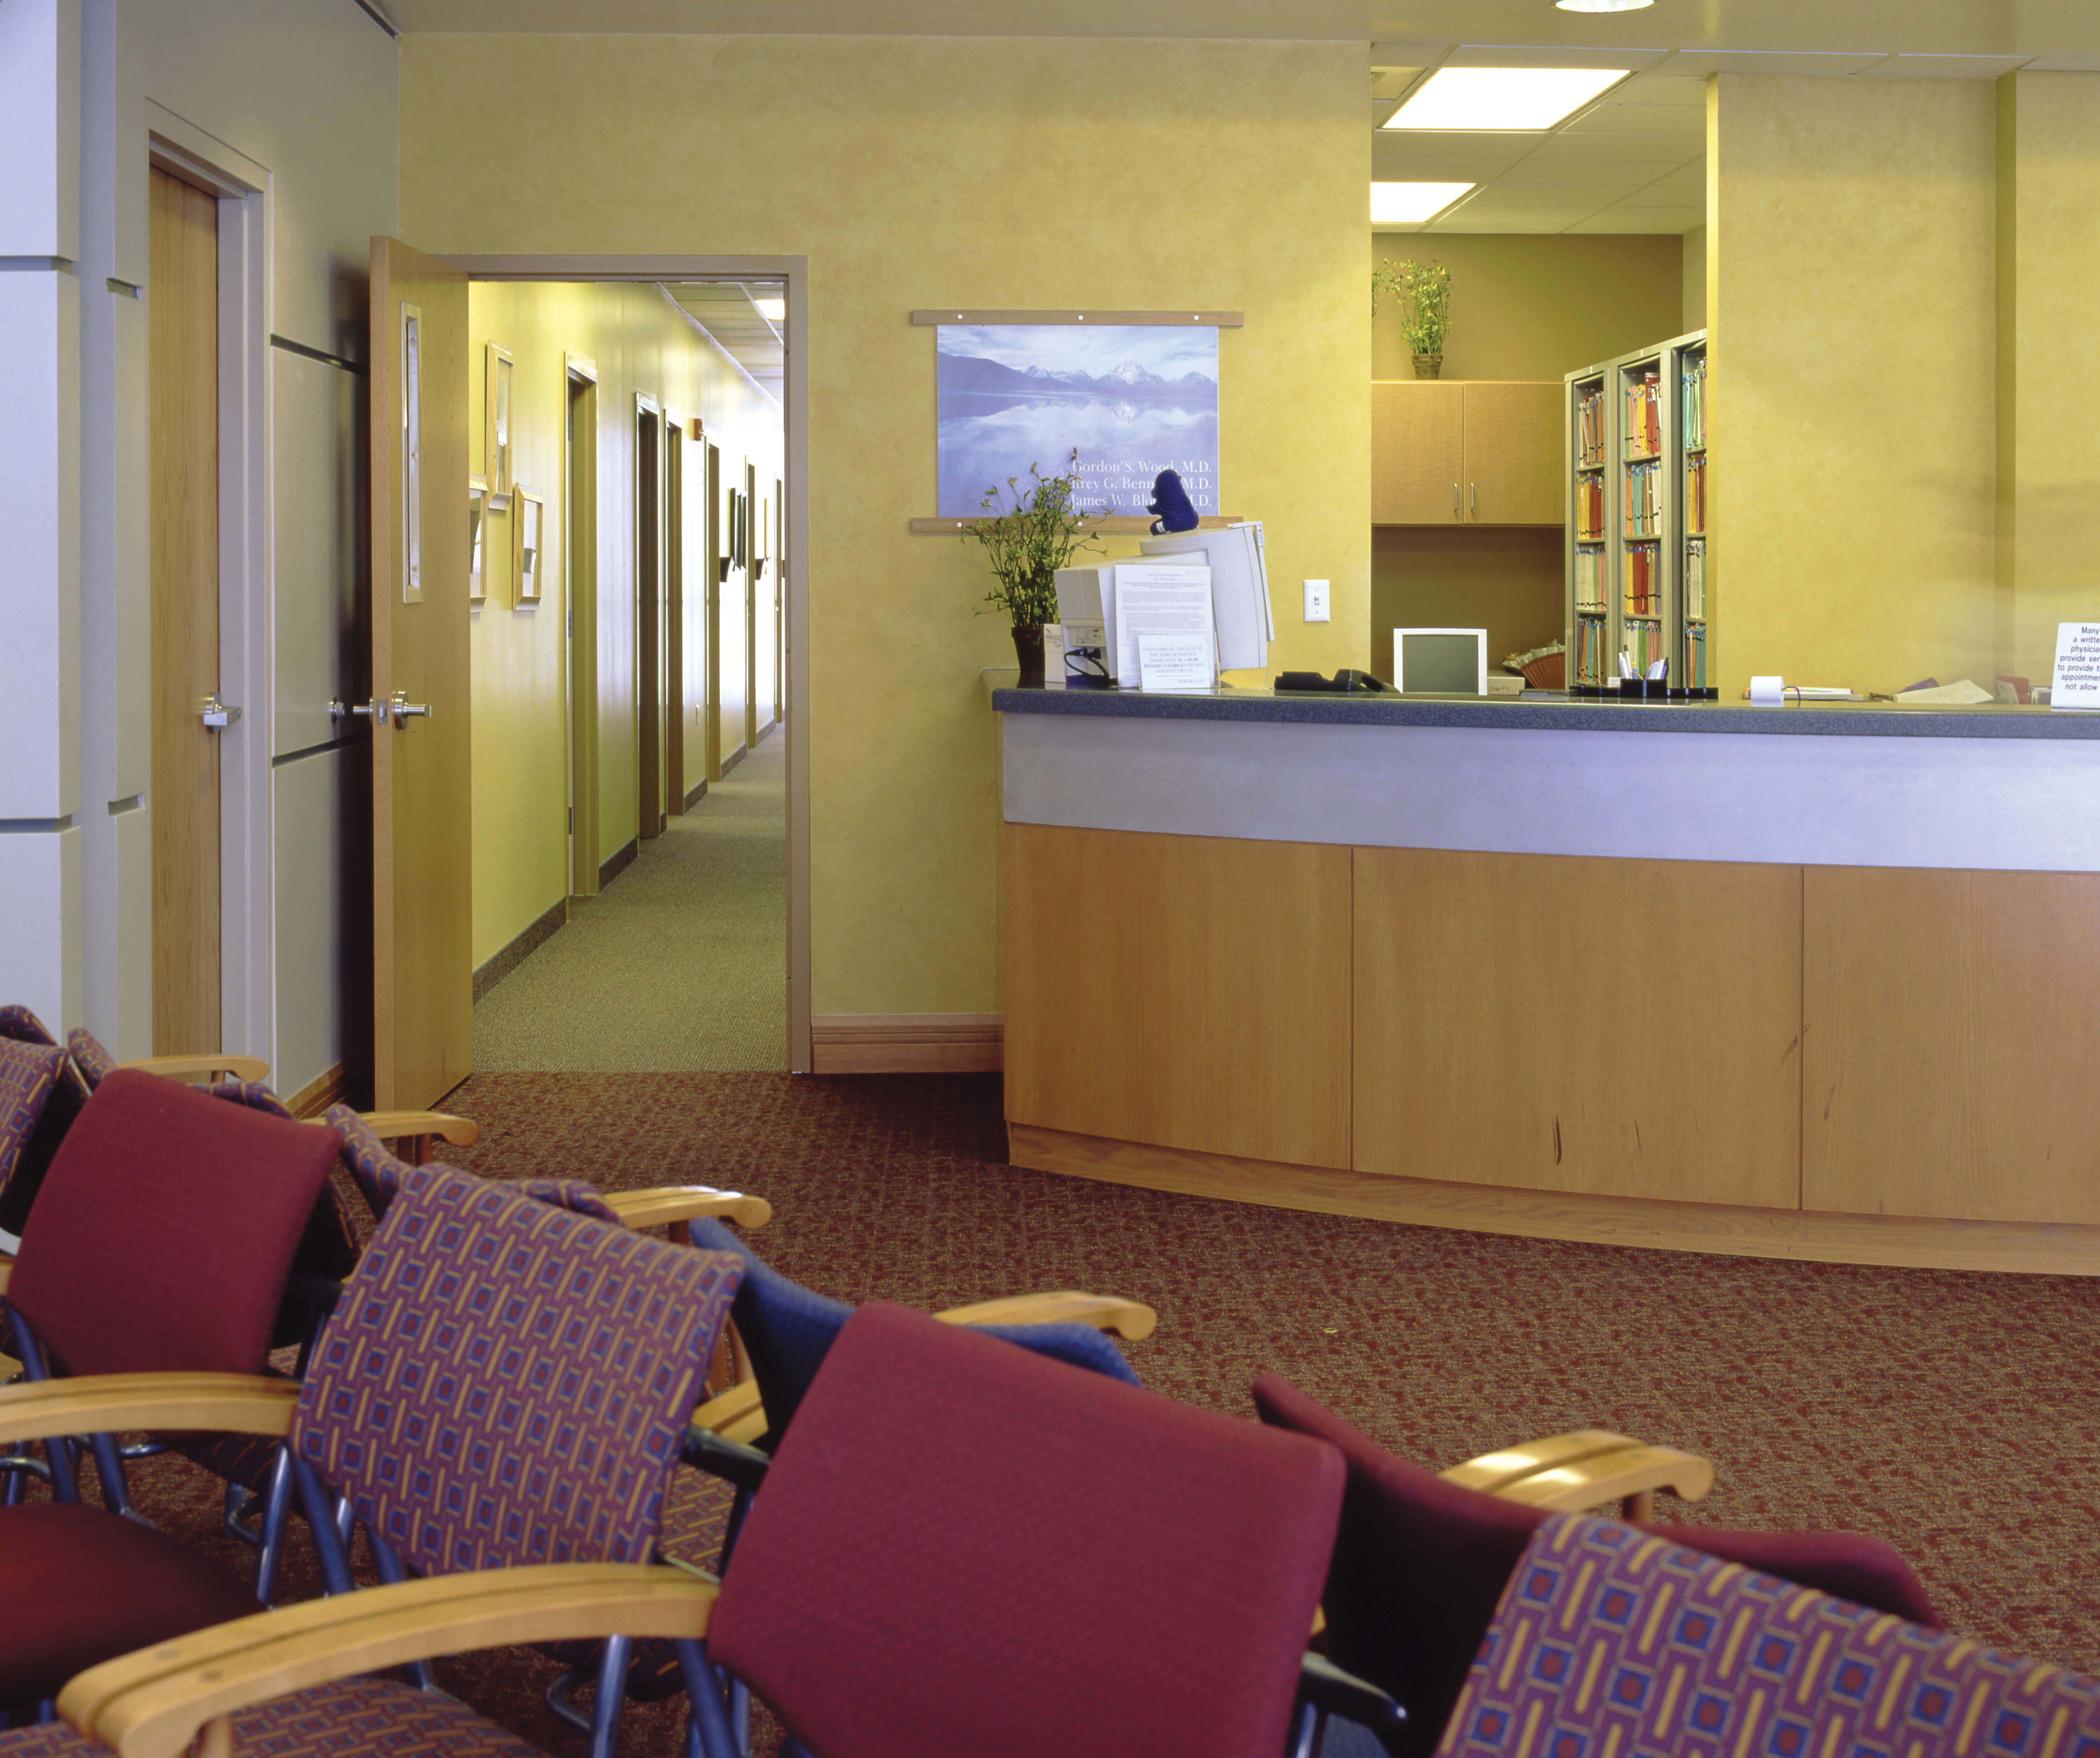 Waiting room after commercial cleaning in Orange County, CA.